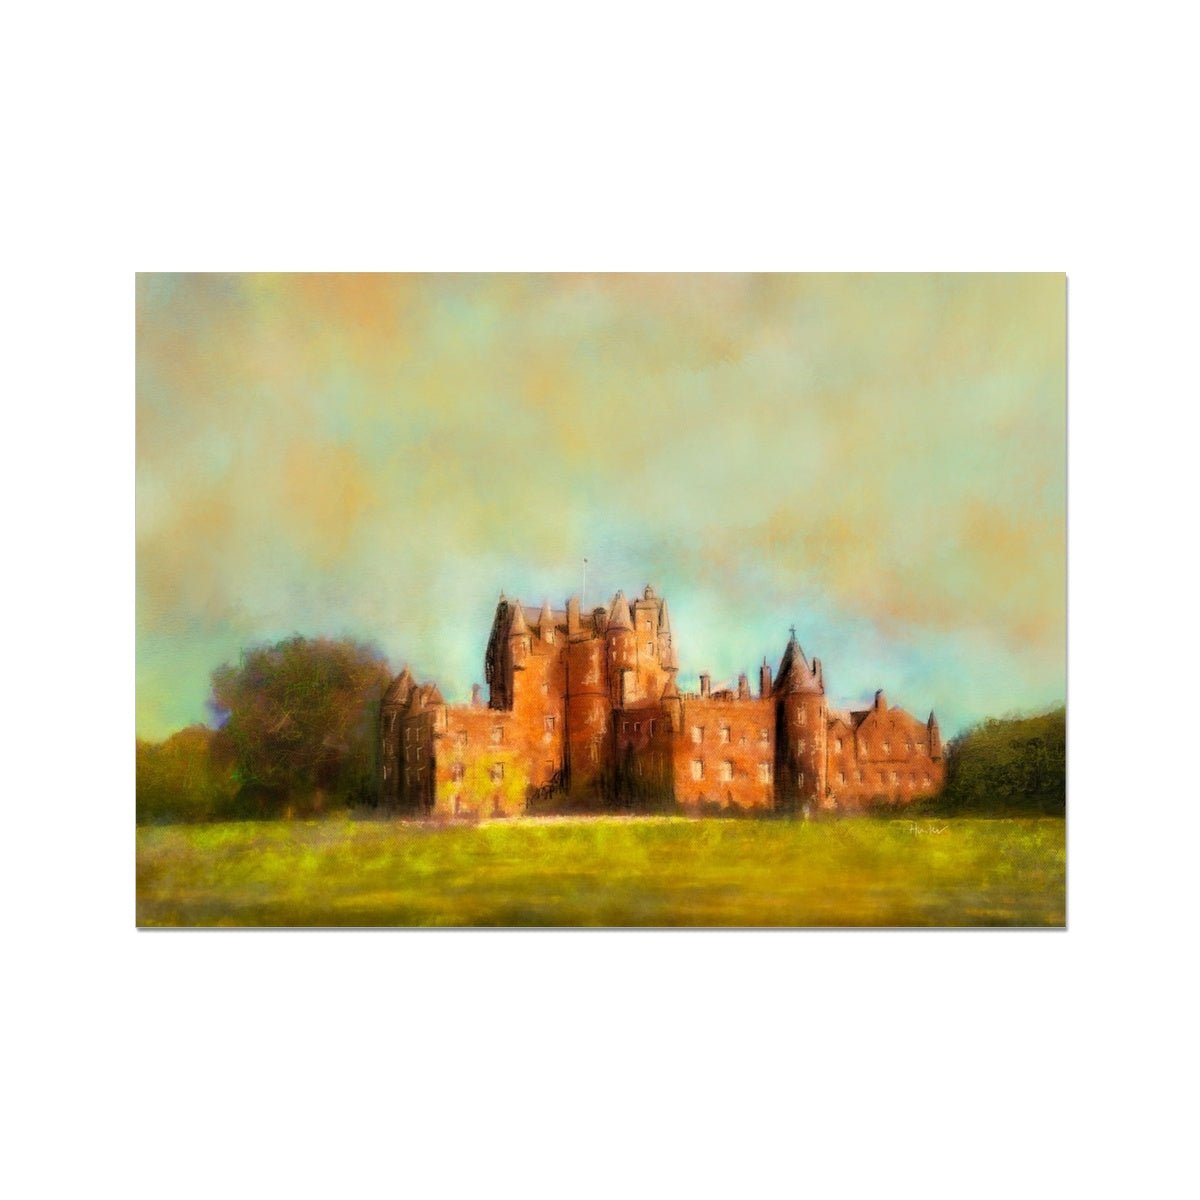 Glamis Castle Painting | Fine Art Prints From Scotland-Unframed Prints-Historic & Iconic Scotland Art Gallery-A2 Landscape-Paintings, Prints, Homeware, Art Gifts From Scotland By Scottish Artist Kevin Hunter